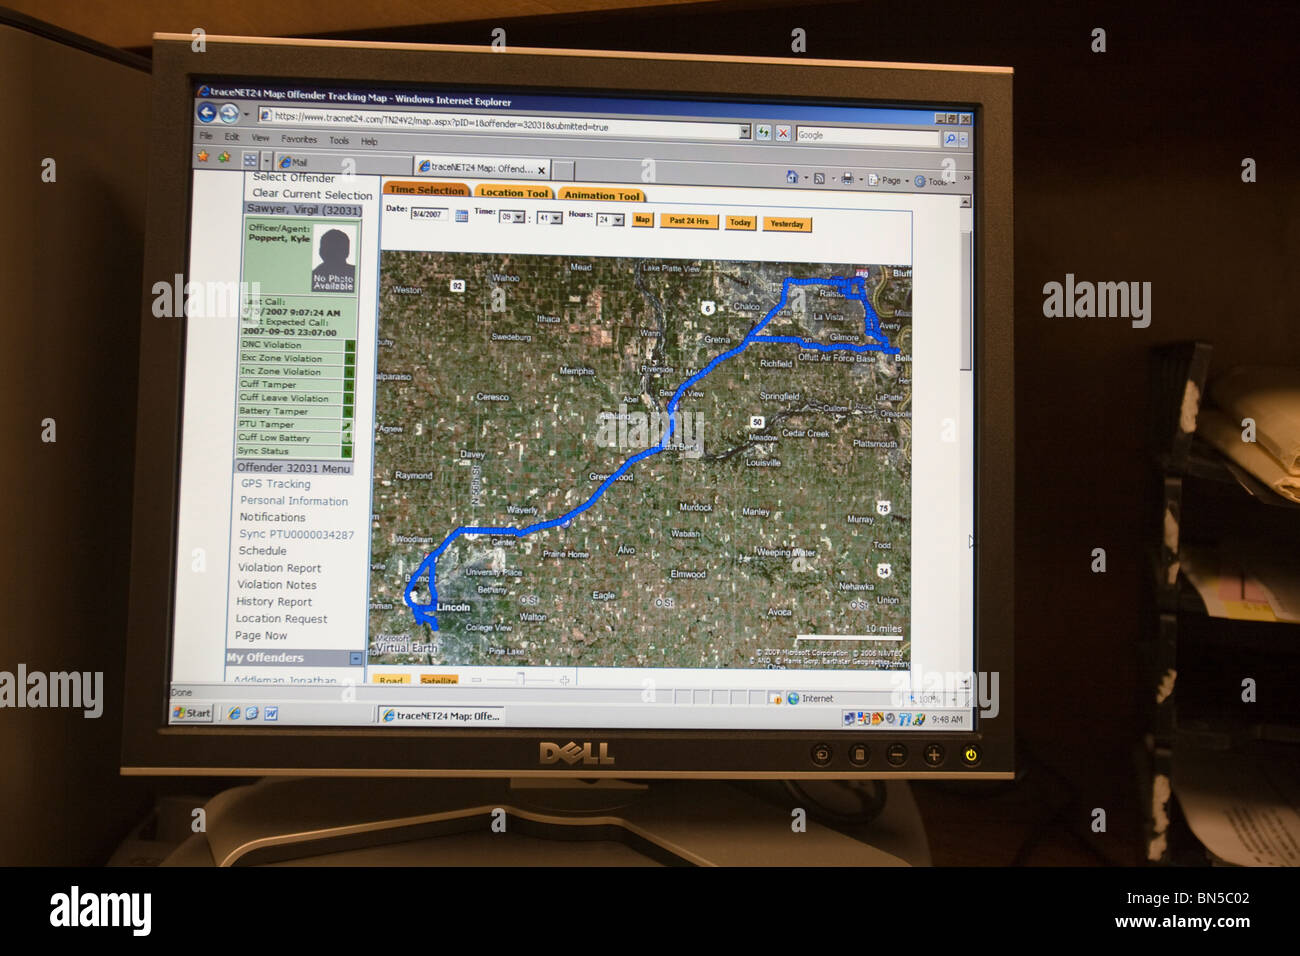 Computer screen showing software used to track movement of released inmate fitted with electronic monitoring device. Stock Photo